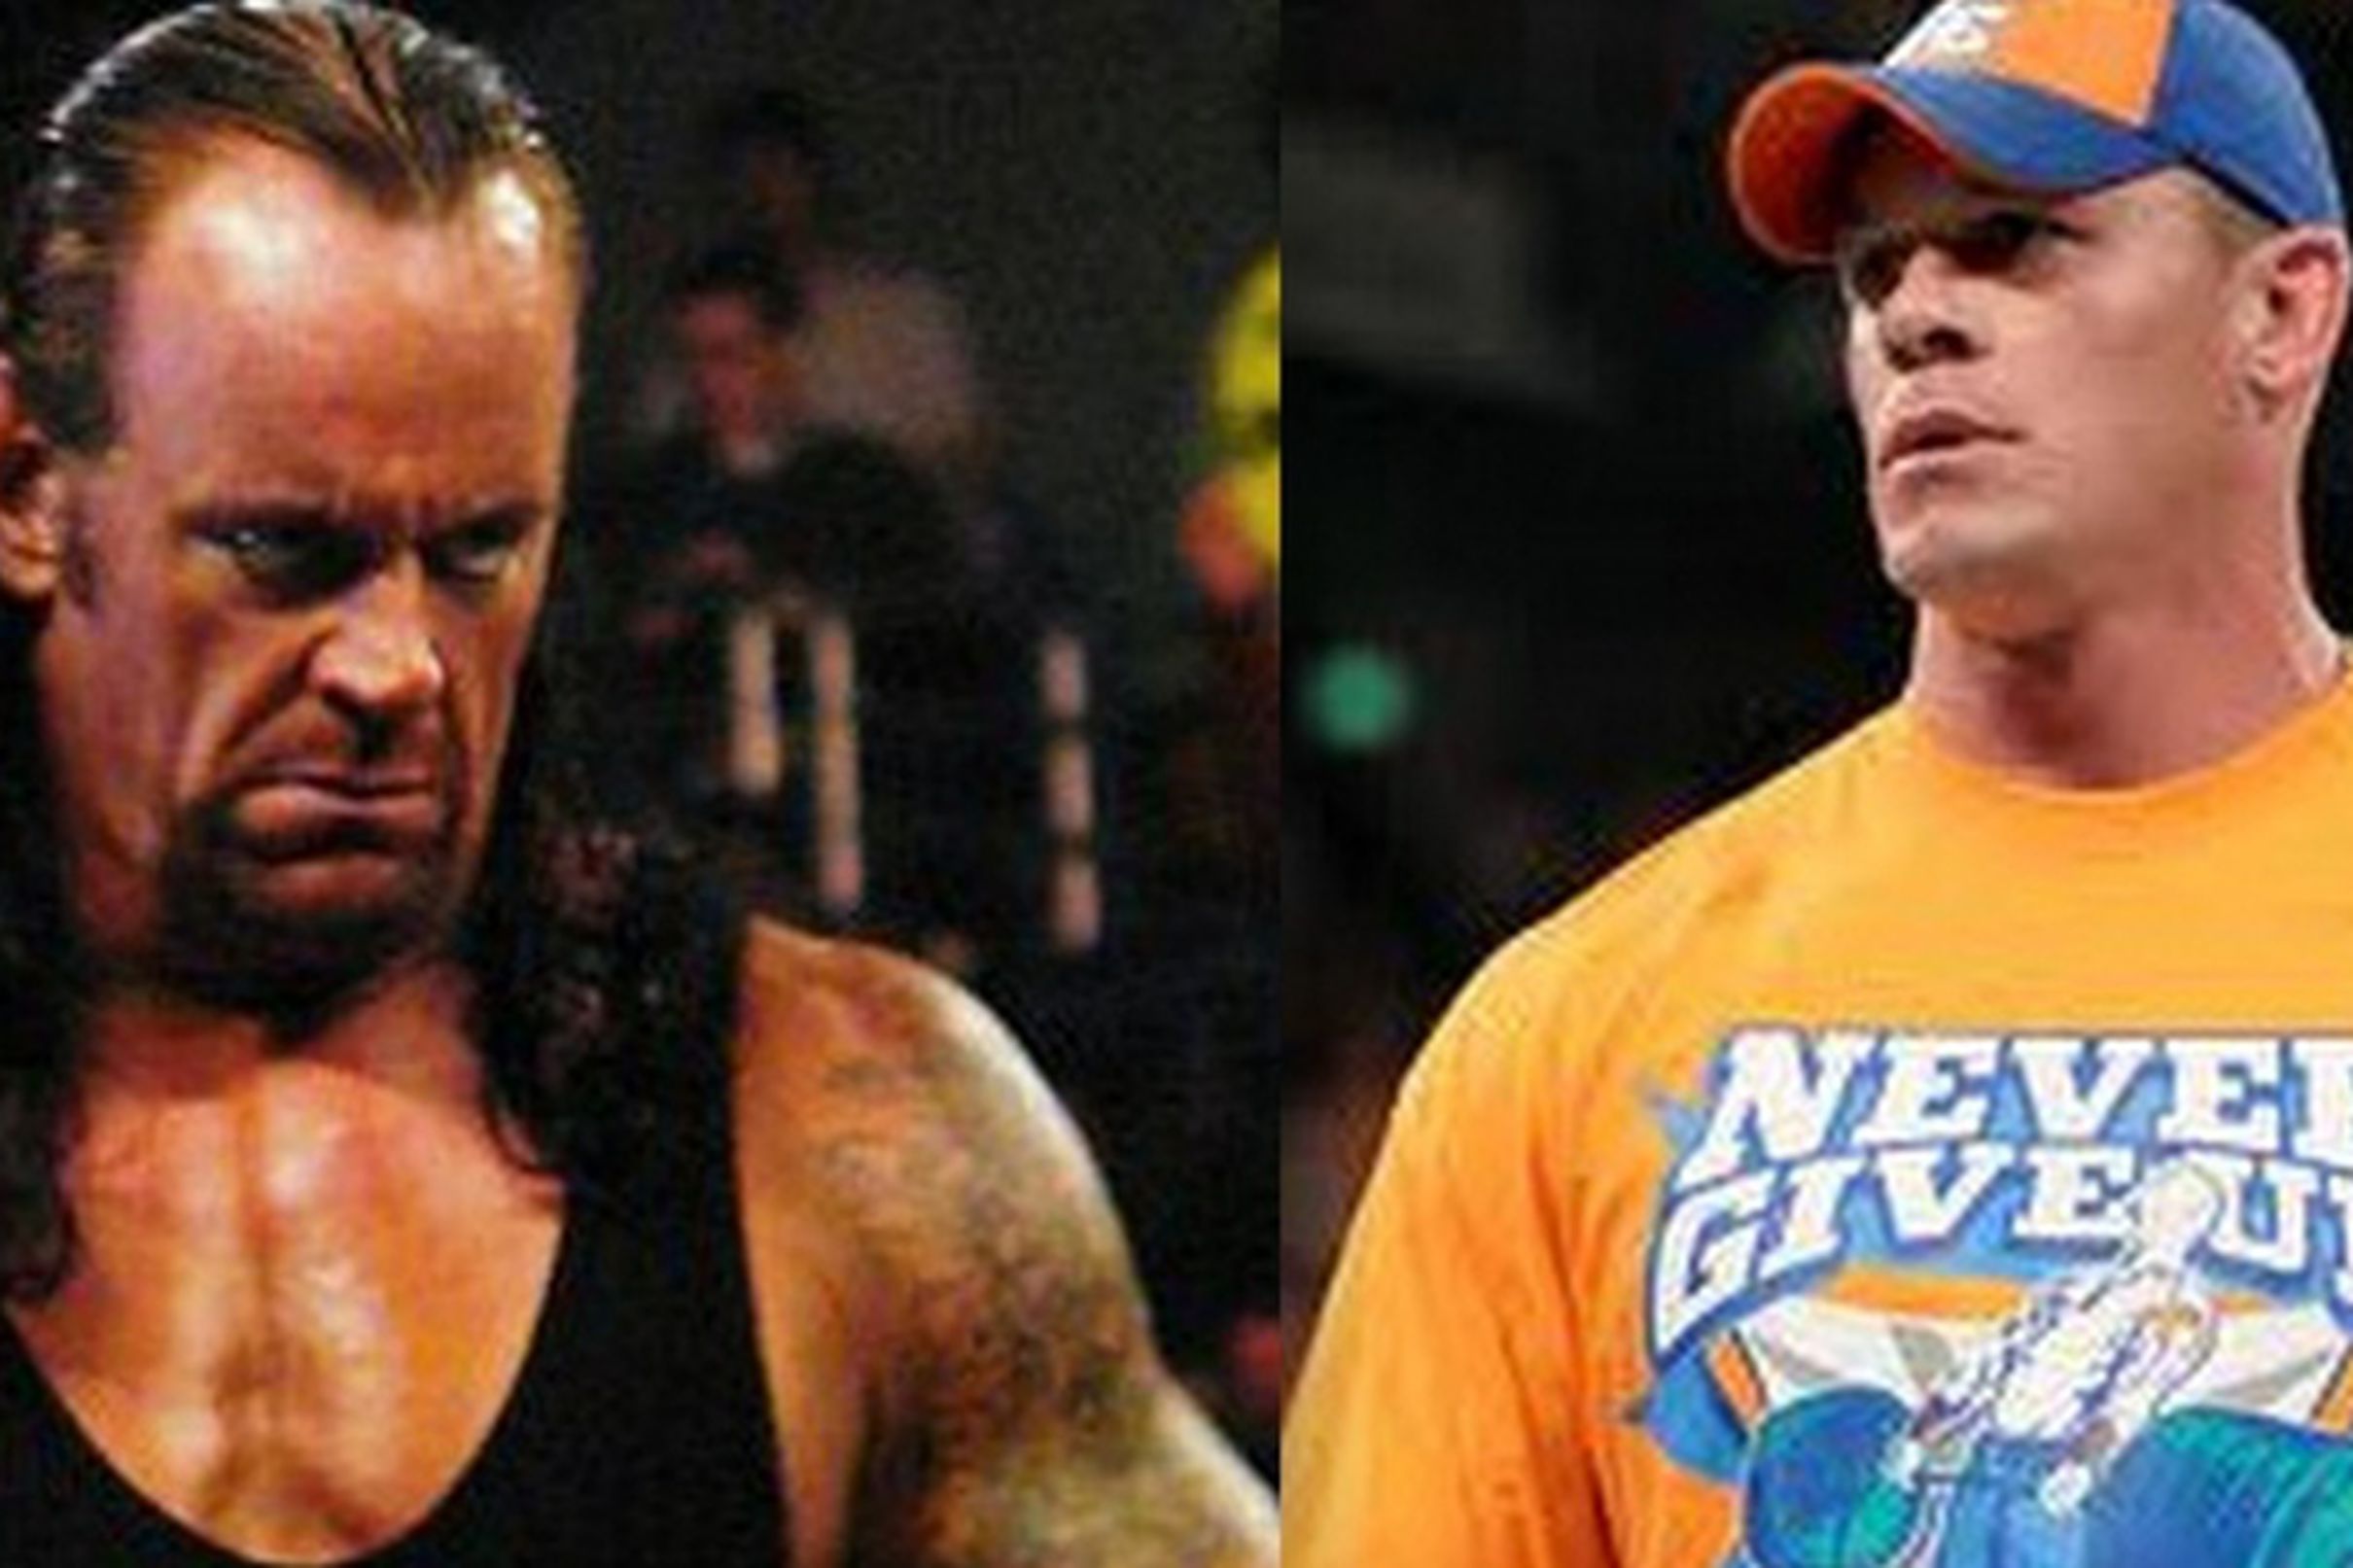 Crazy Thought of the Day: It's time for John Cena vs. Undertaker at